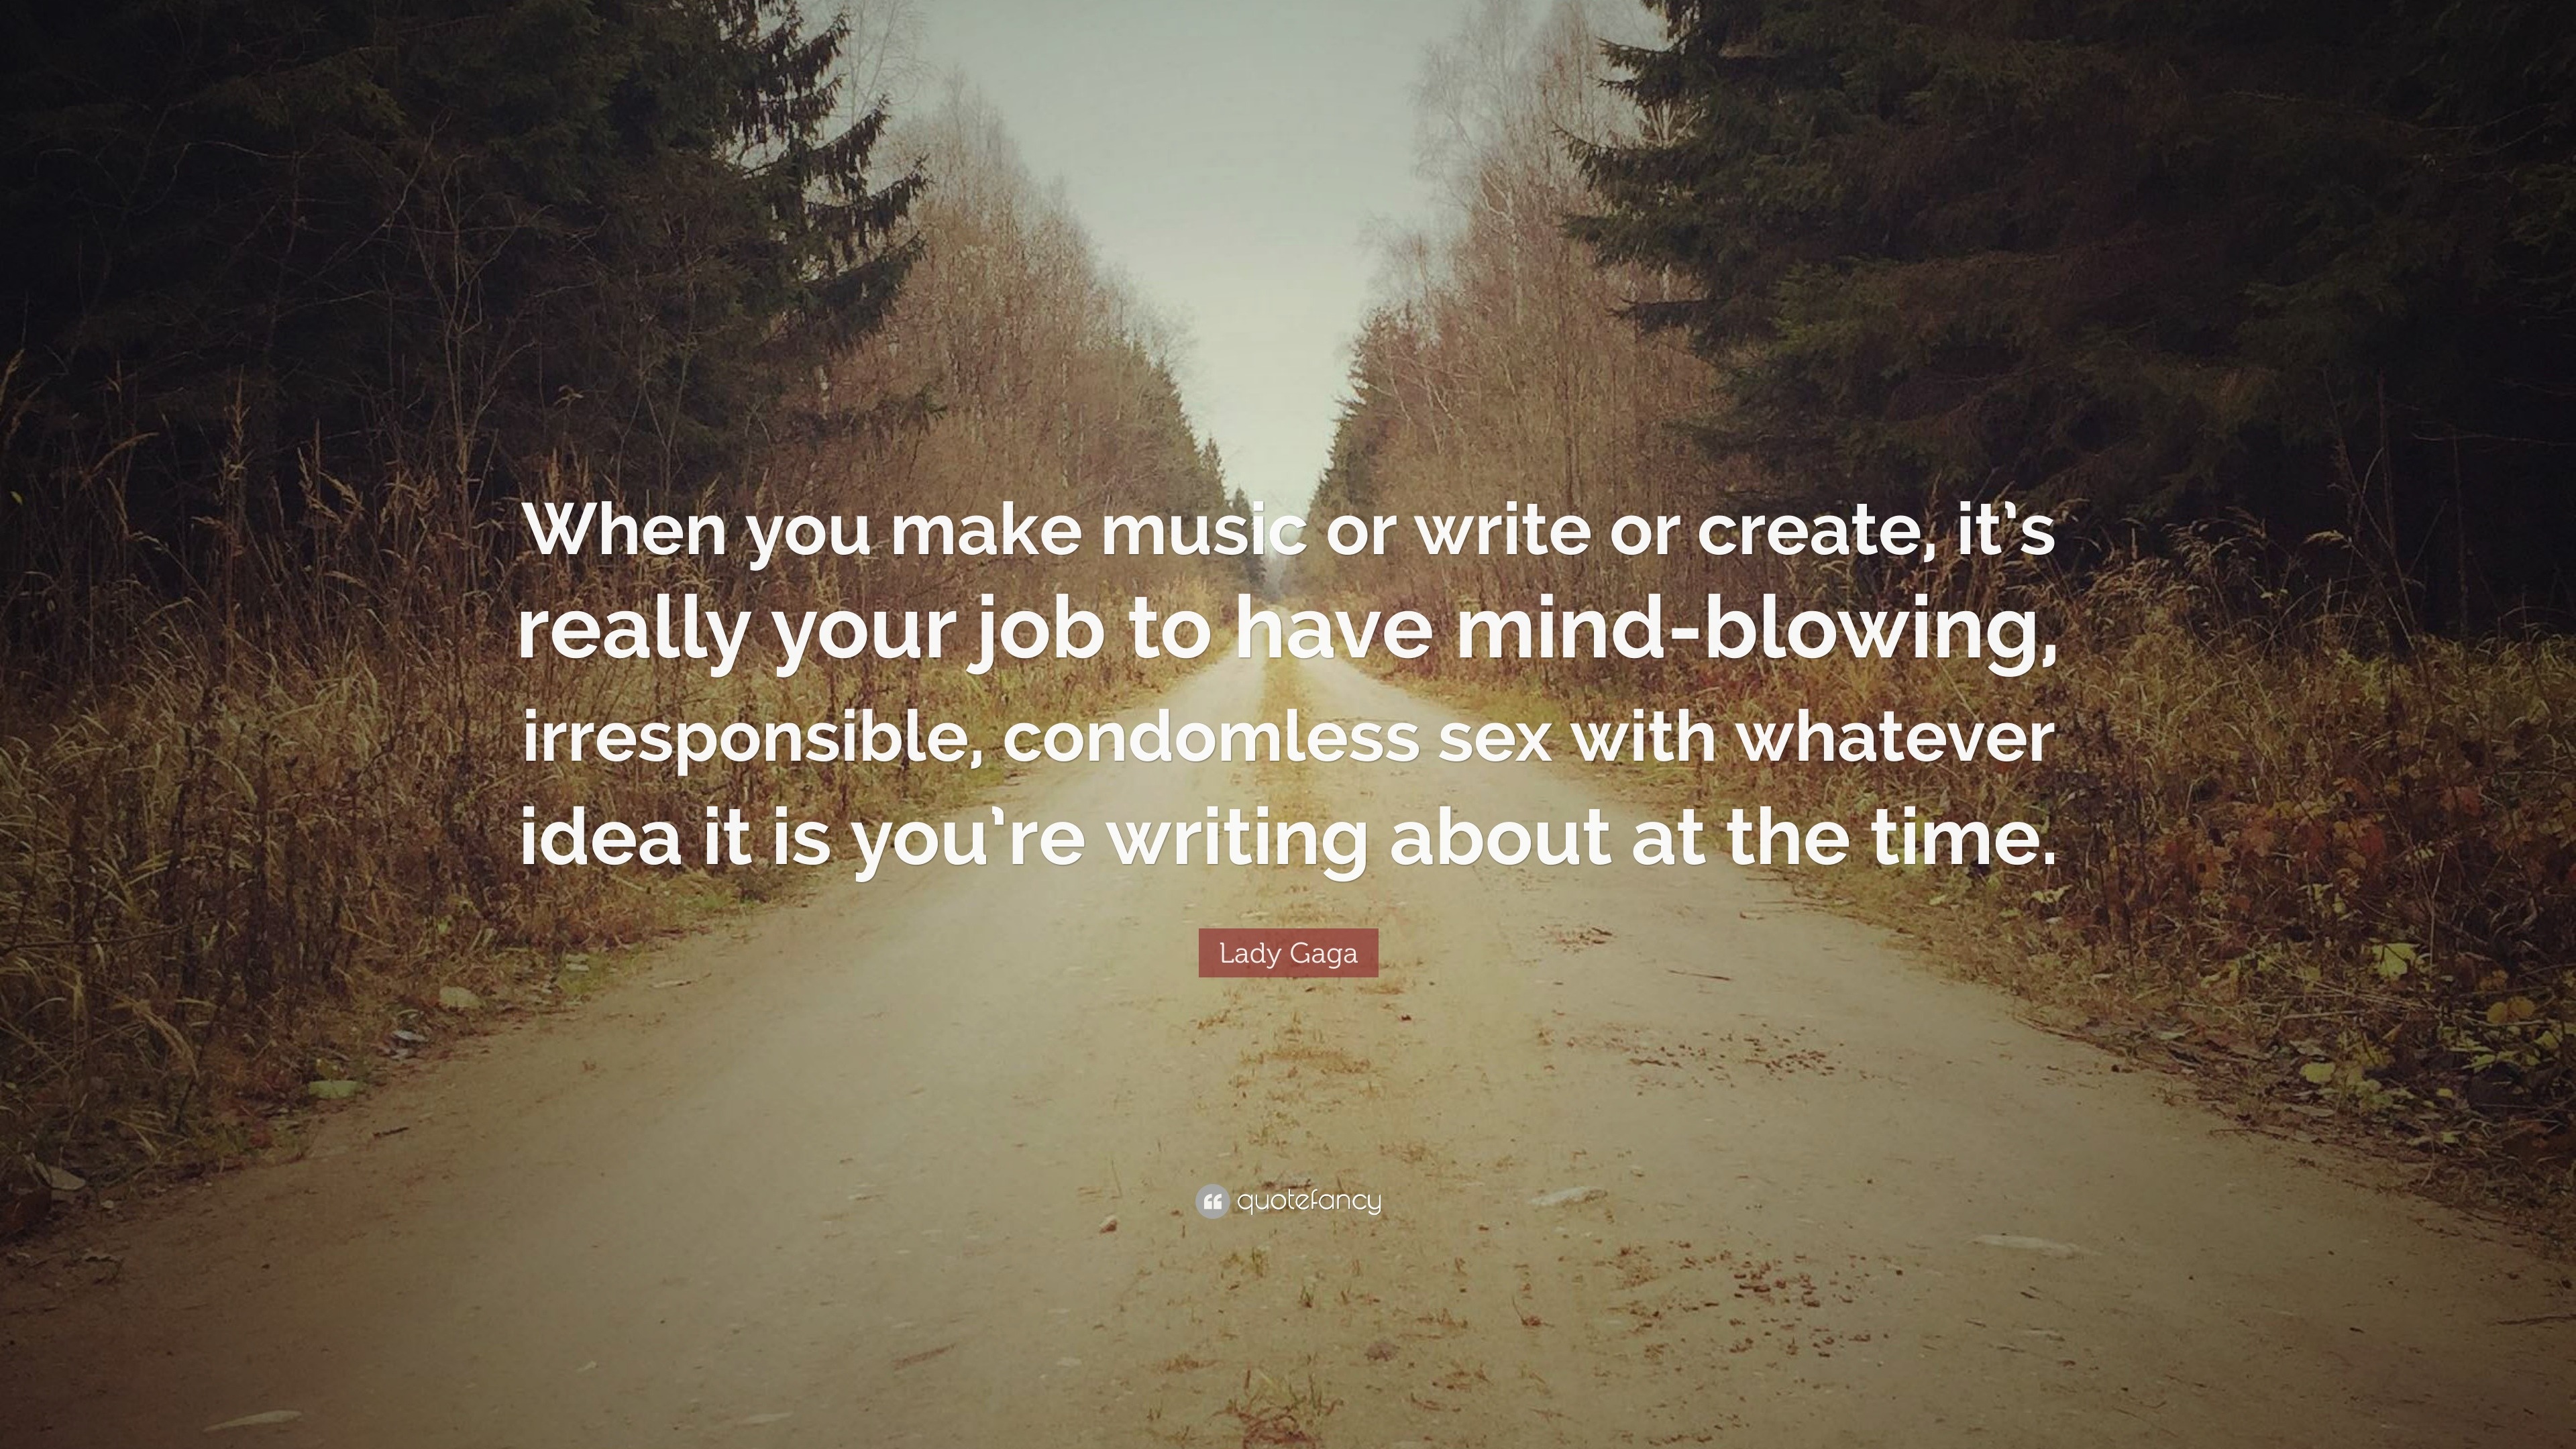 Lady Gaga Quote “when You Make Music Or Write Or Create